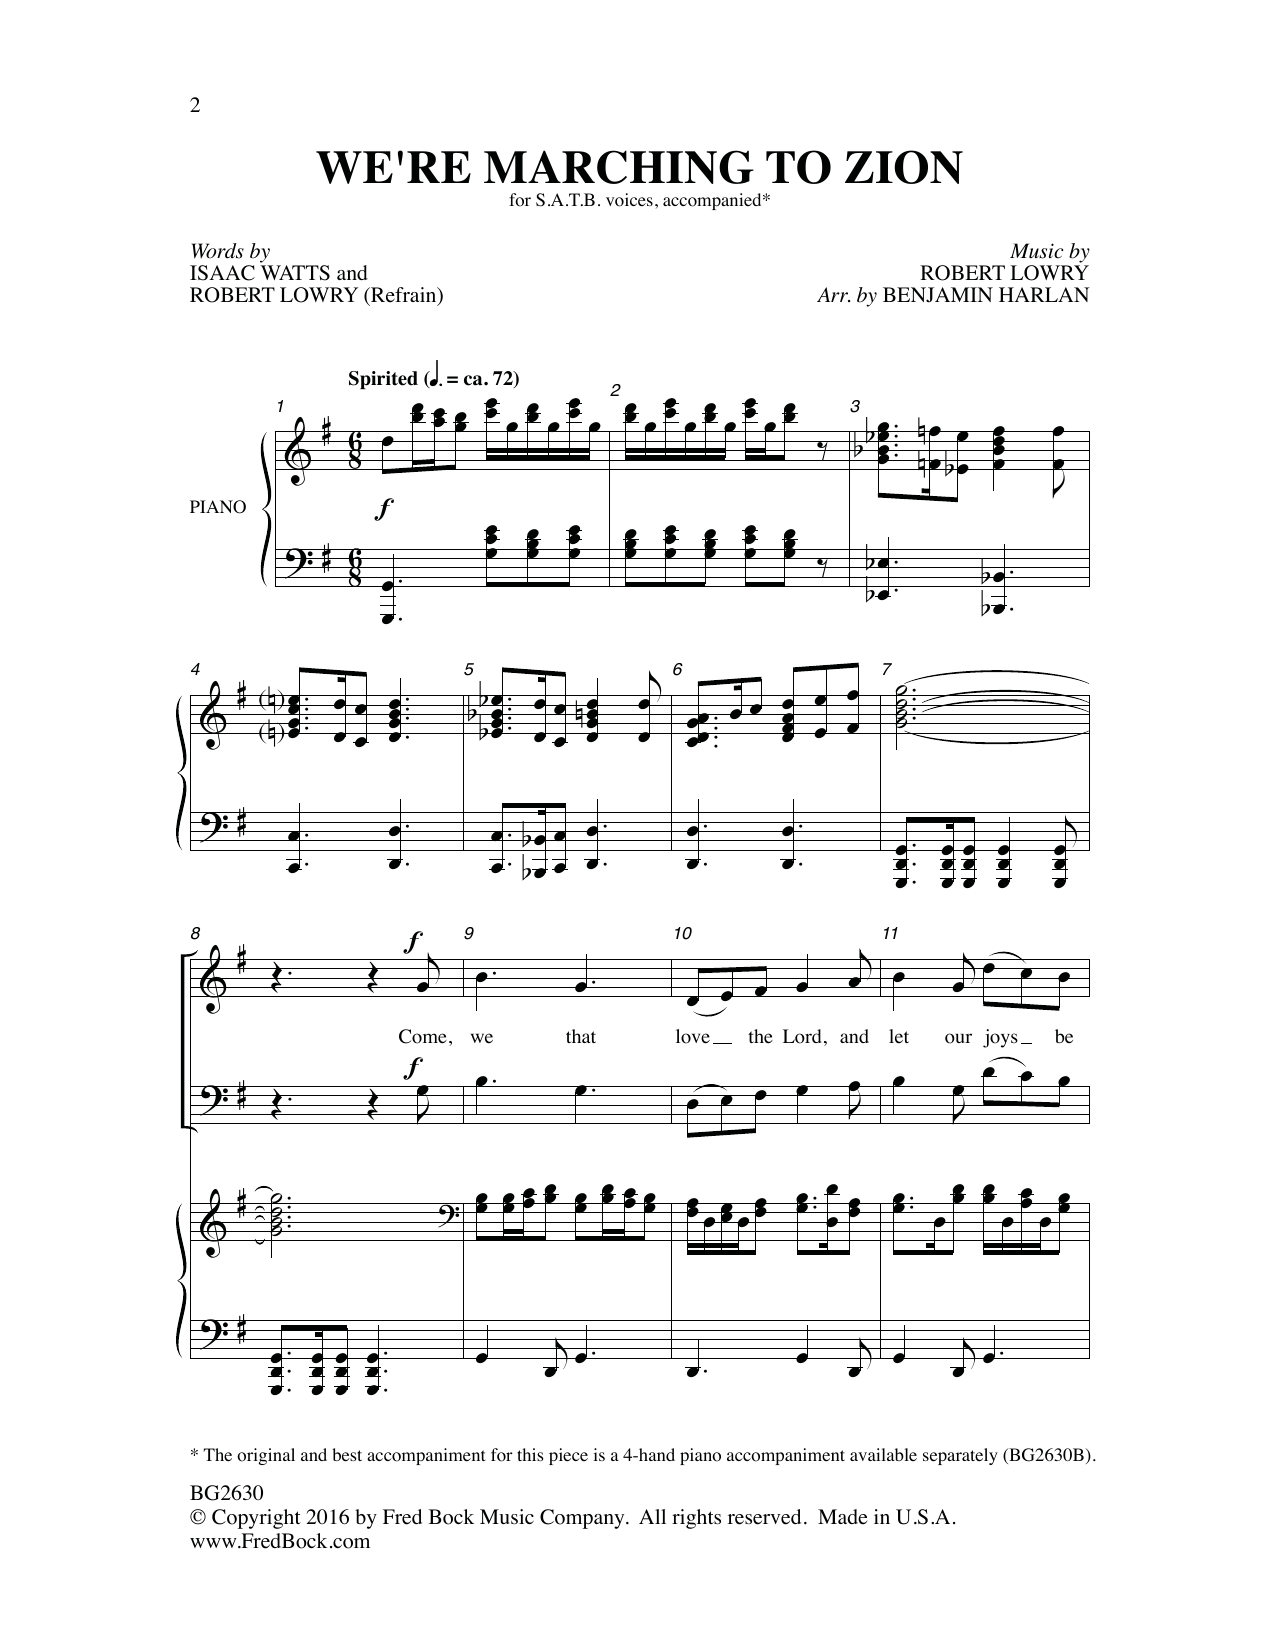 Download Robert Lowry We're Marching to Zion Sheet Music